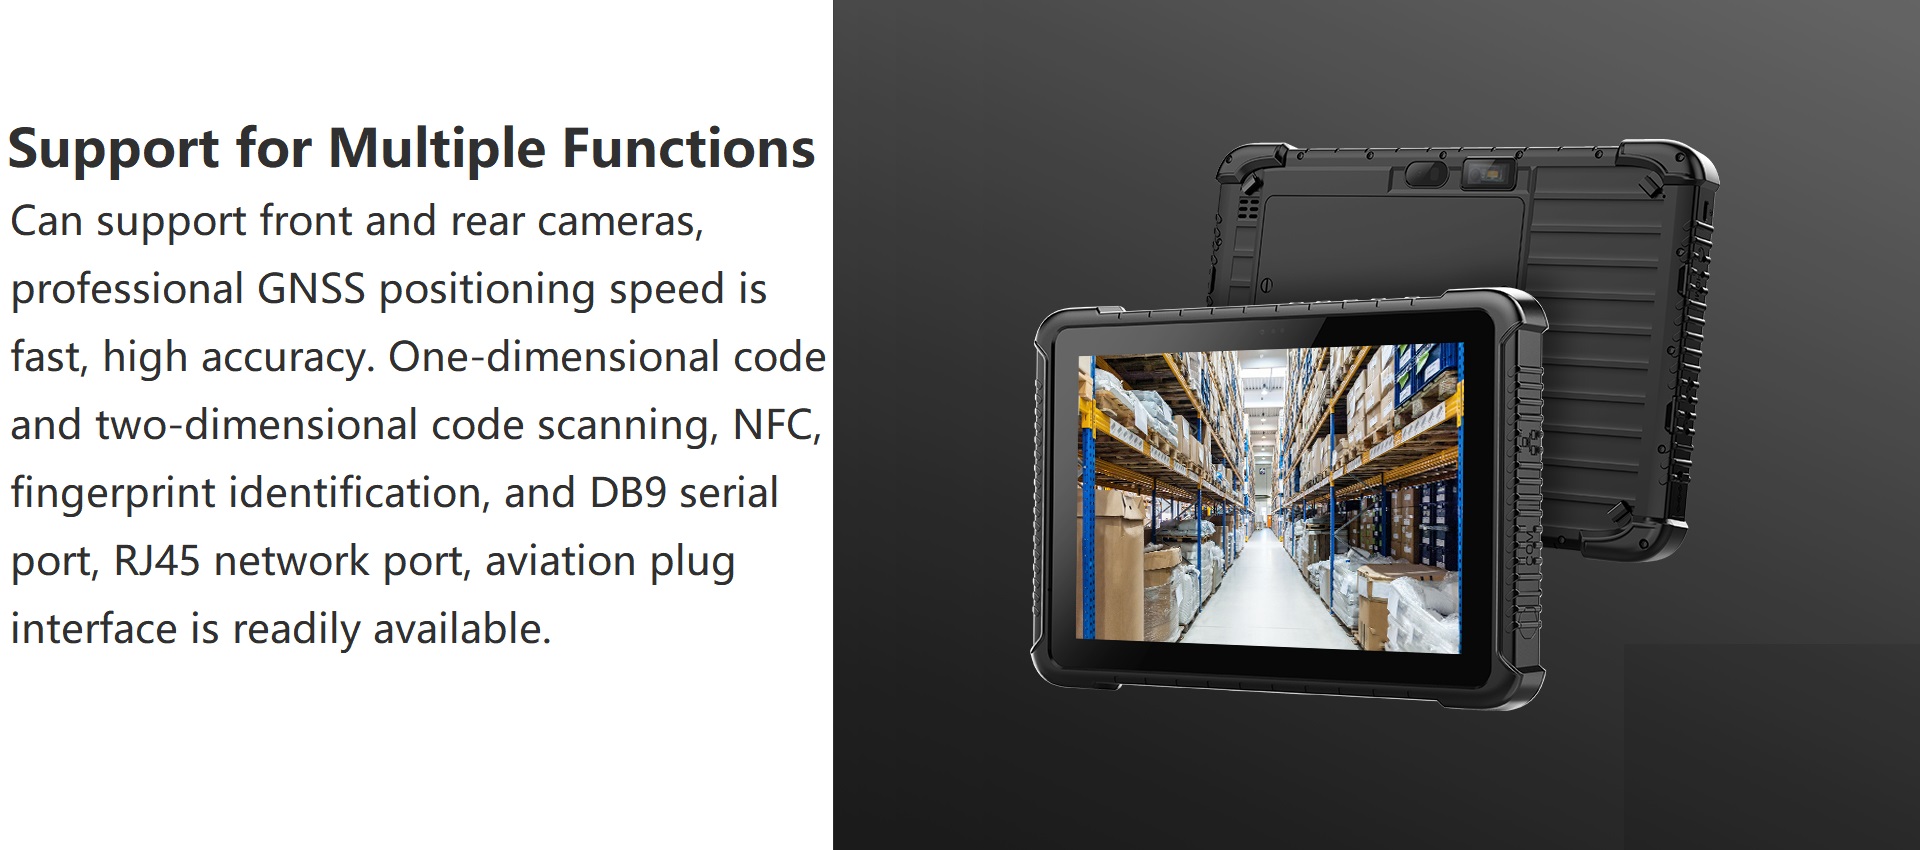 10.1inch rugged tablet PC data (5)